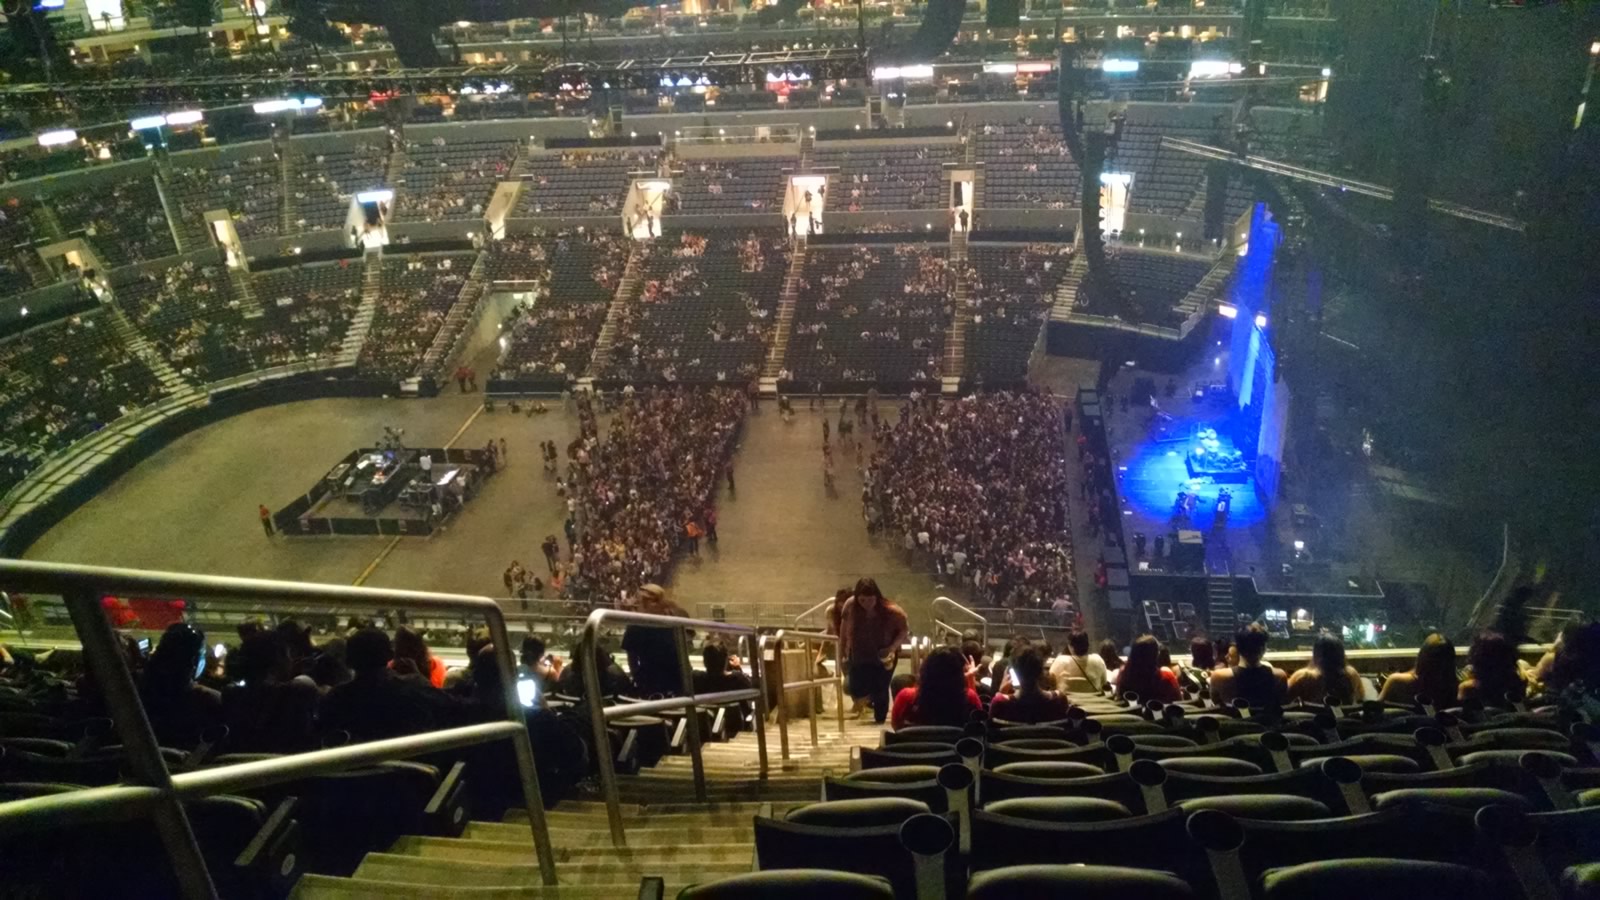 Looking far down at the side of the stage: Staples Center Section 333 ...